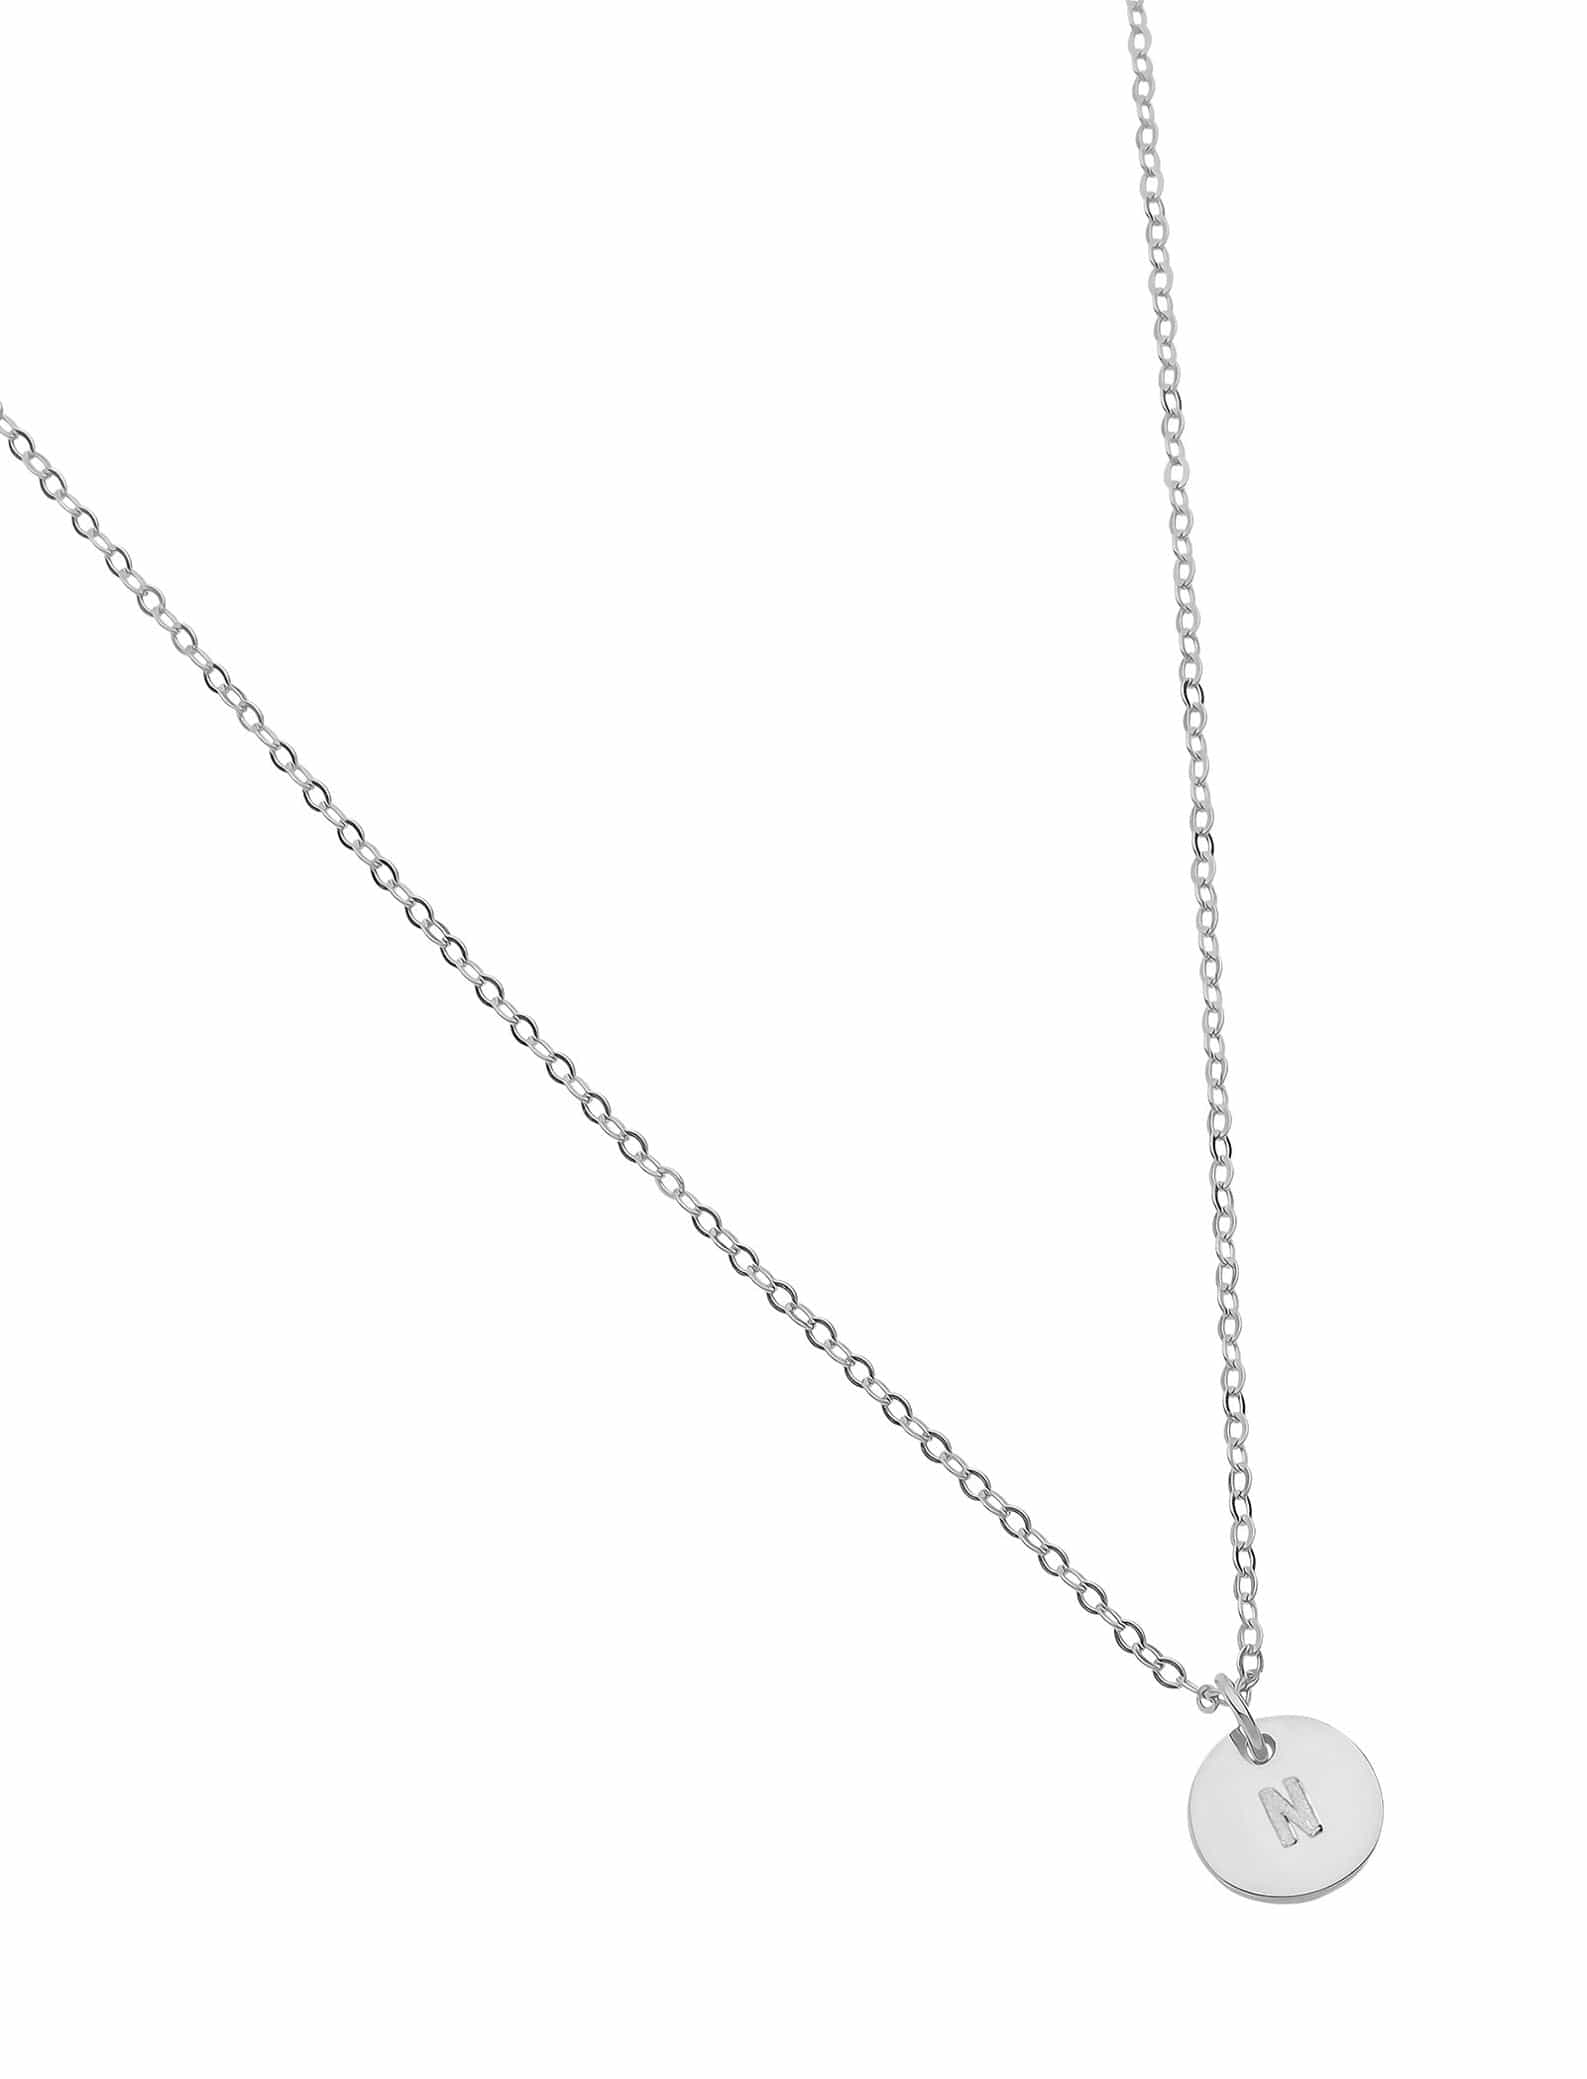 Sterling Silver Pavé N Initial Necklace with White Brilliance Zirconia  Stones | Jewlr